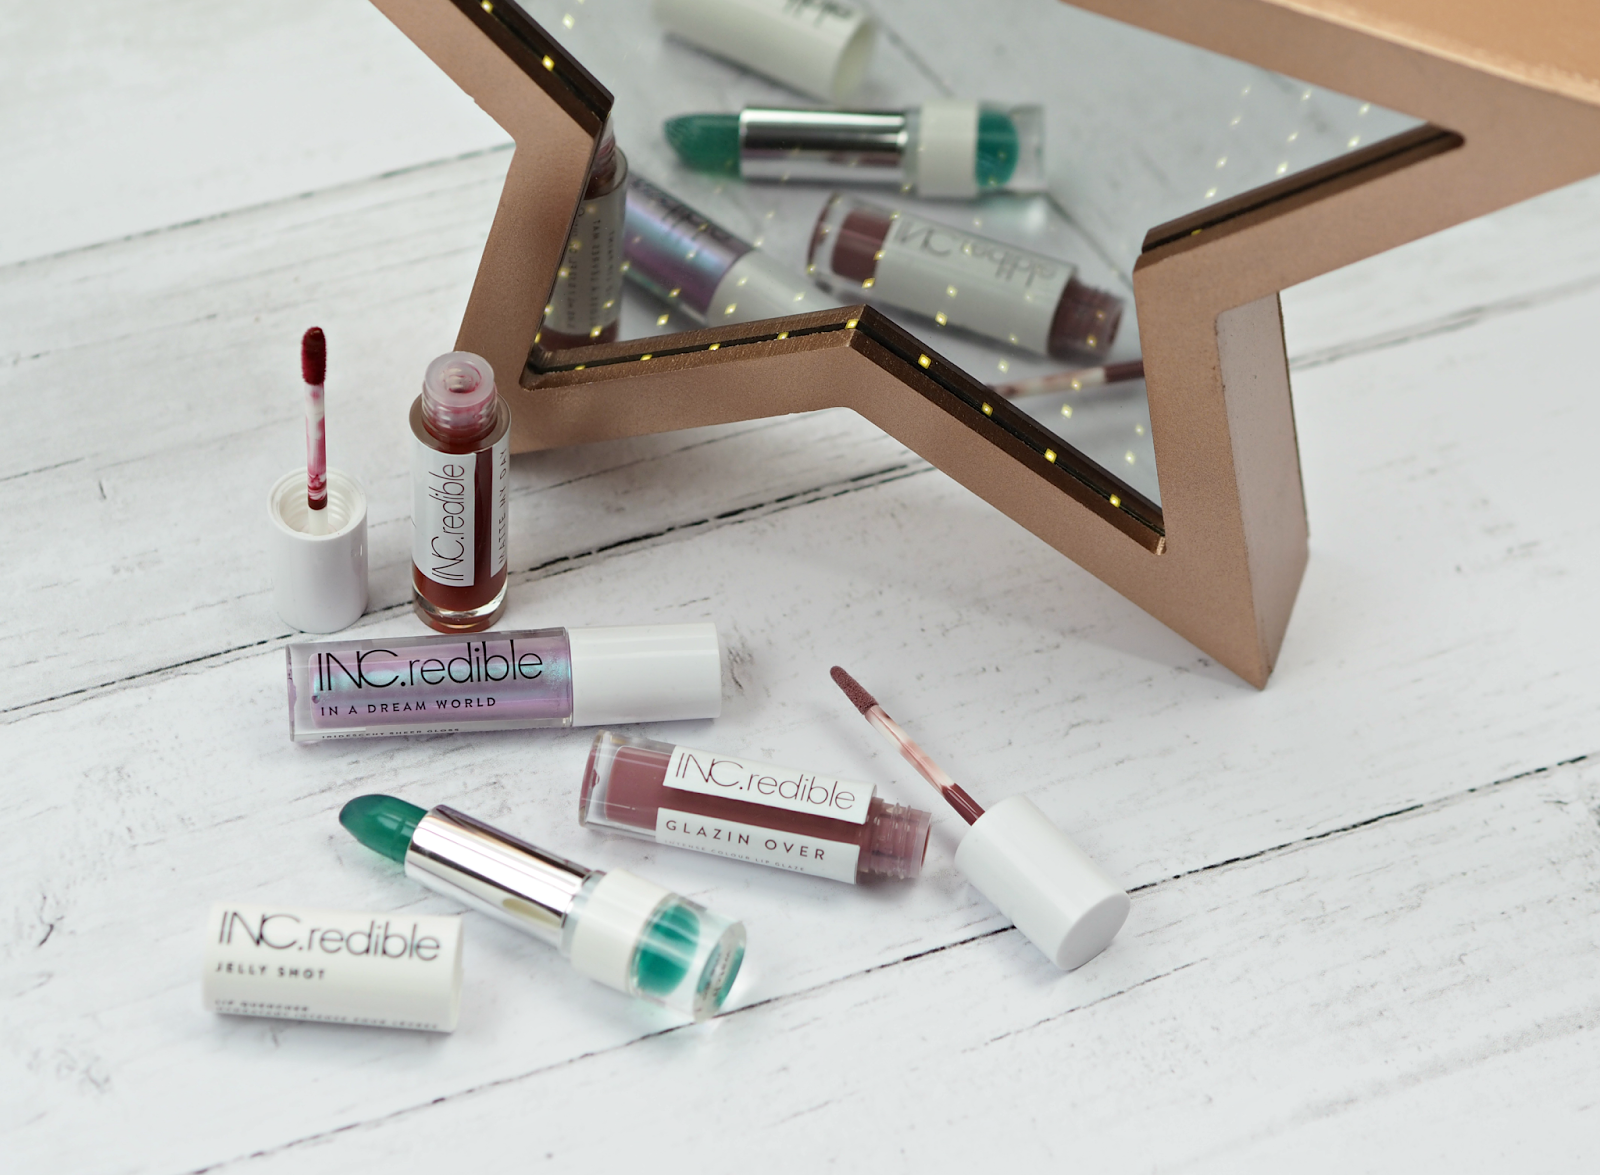 The New Lip Brand I Stumbled Across: INC.redible Is Everything I'm Excited About In Beauty This Year